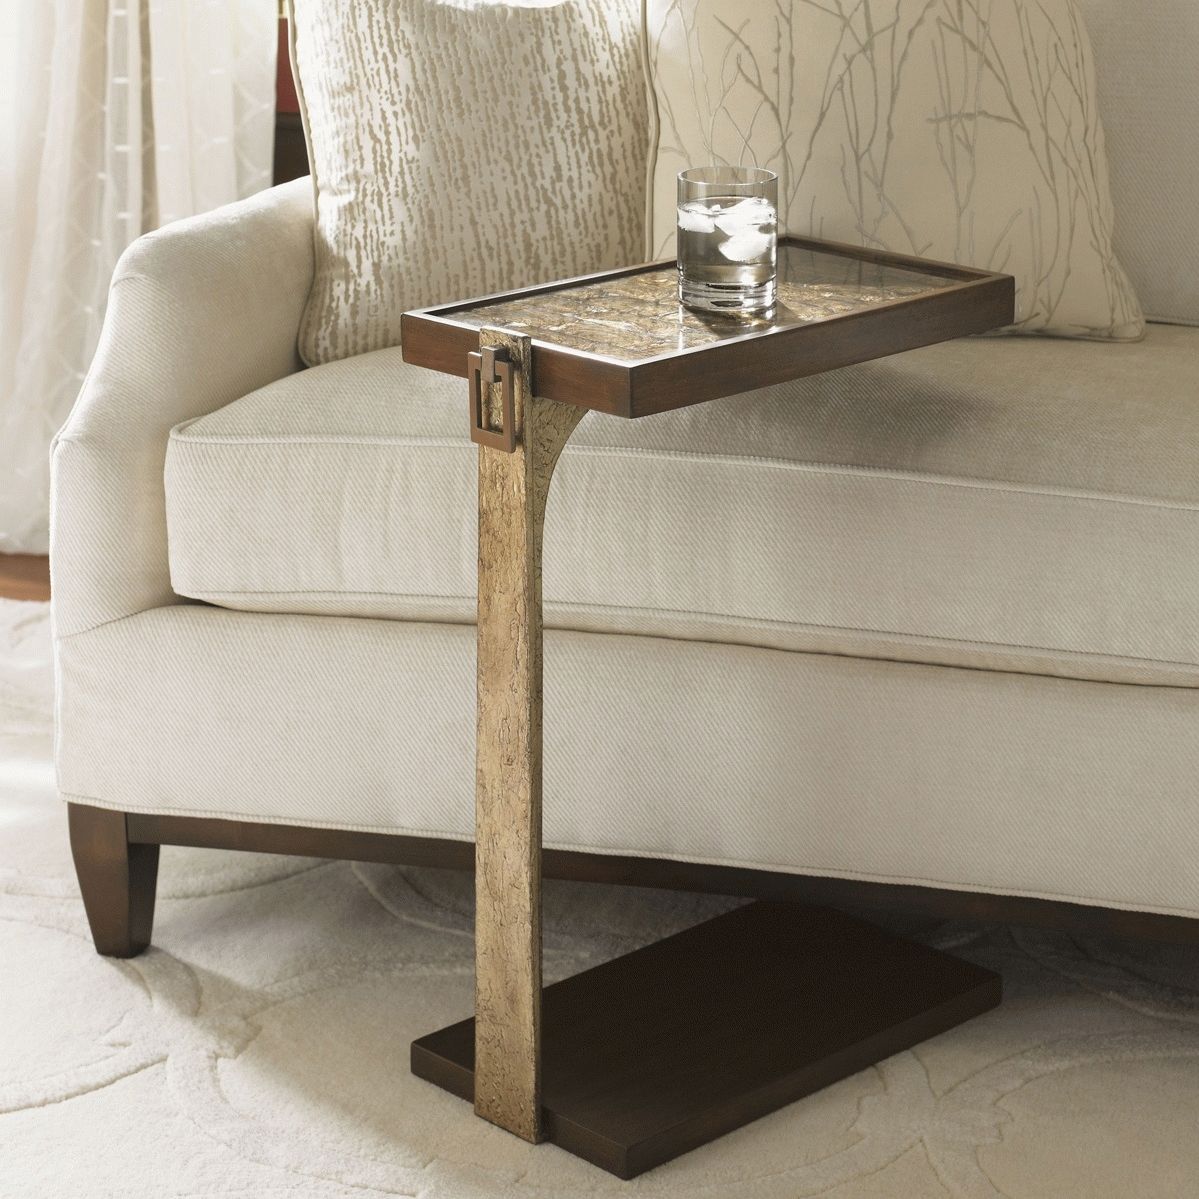 Furniture : Tall Small End Table With Drawer Plans Super Slim Cup Inside Sofas With Drink Tables (View 2 of 10)